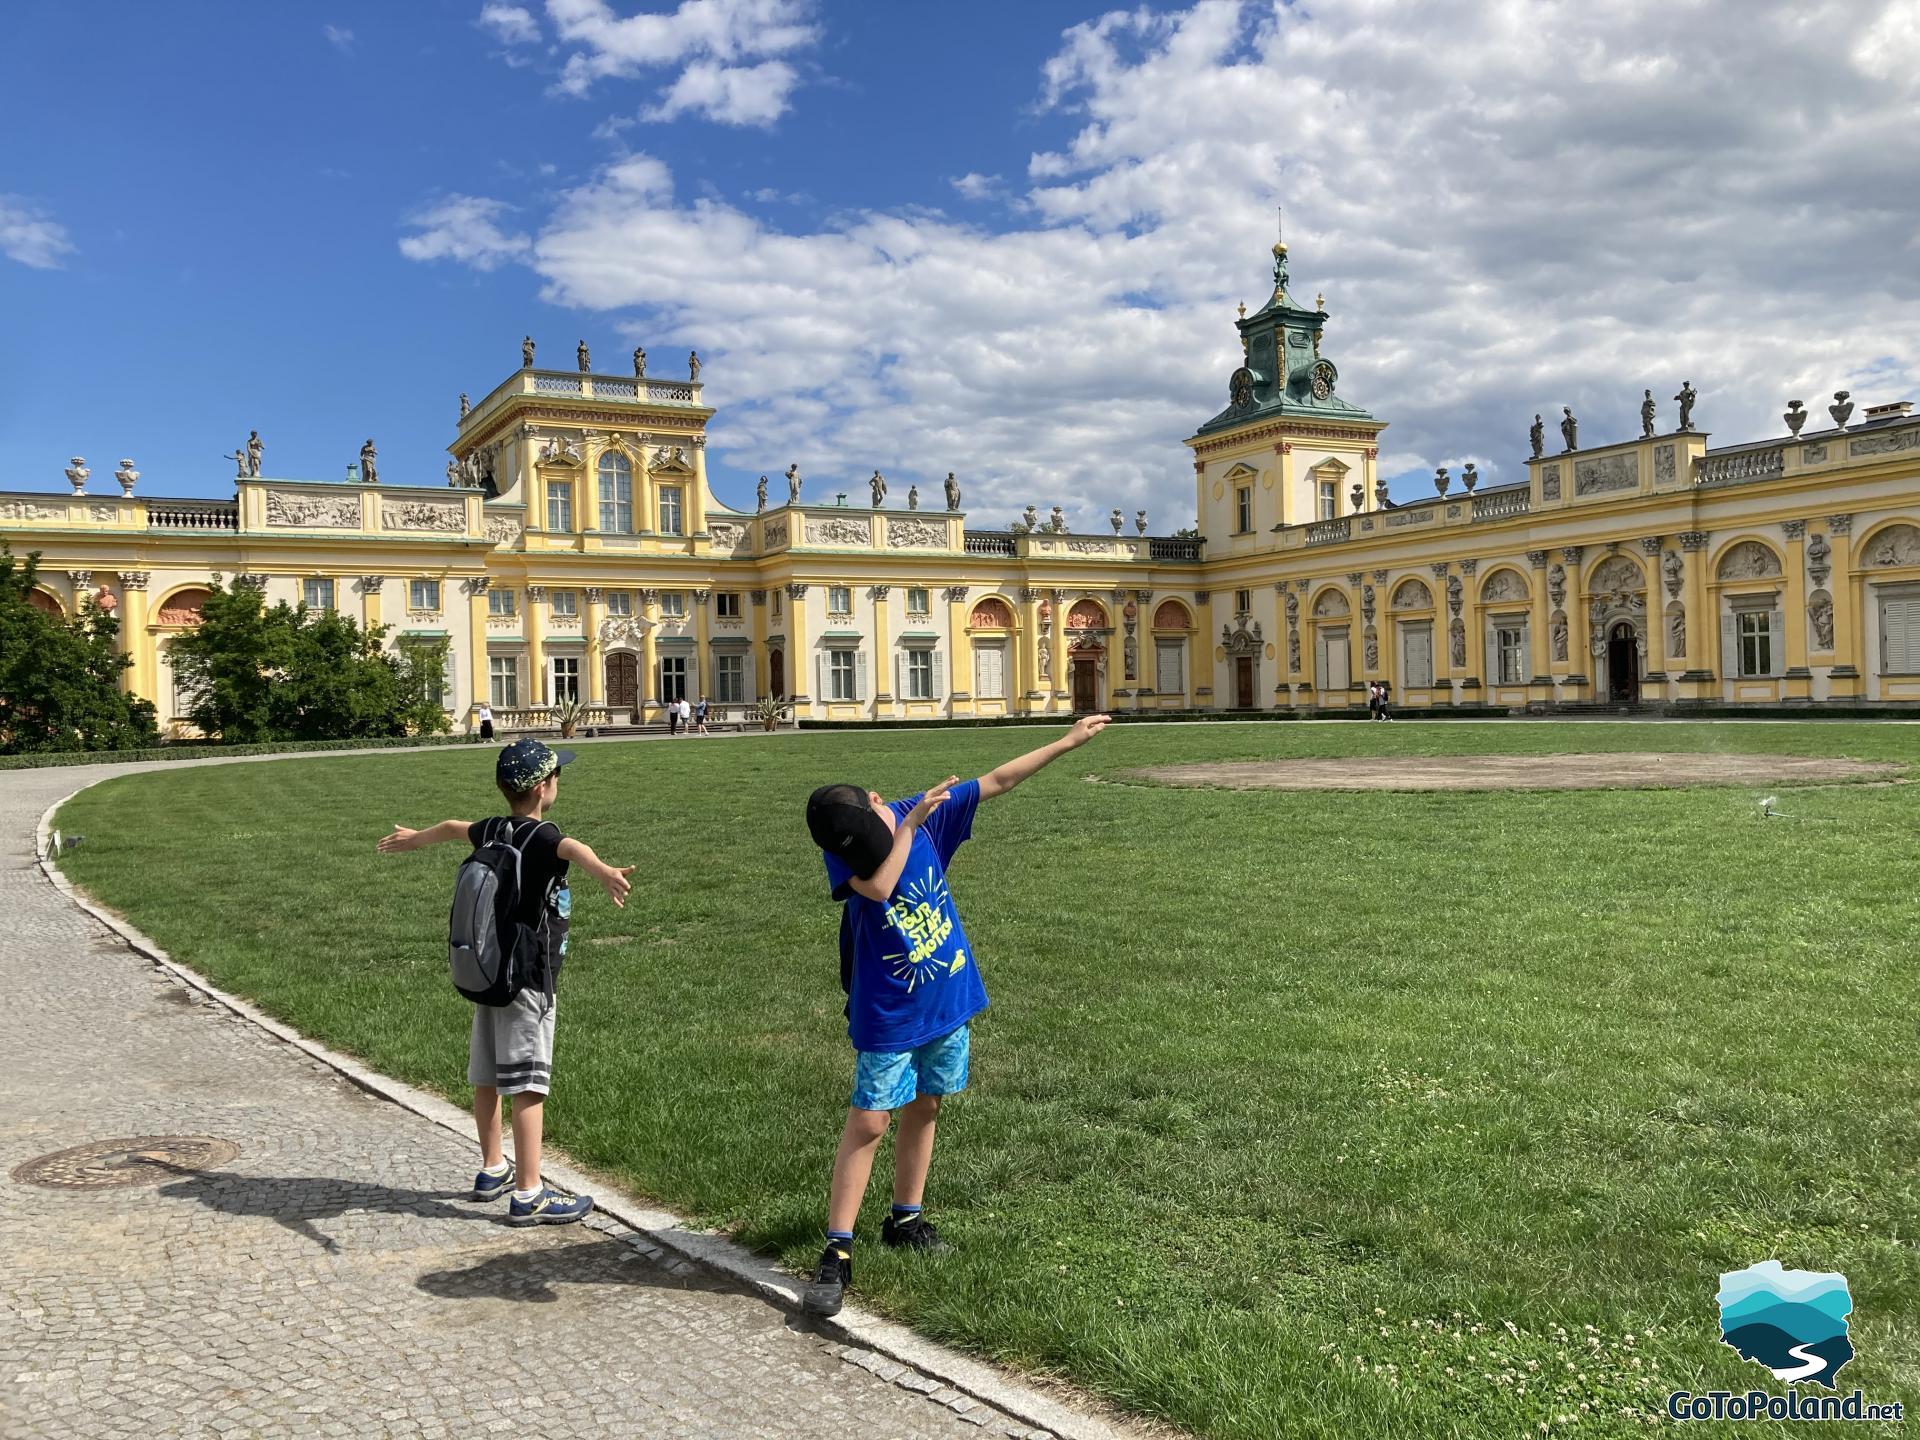 two boys are standing on an alley of cobblestones, behind them a green lawn and a large palace with a yellow facade